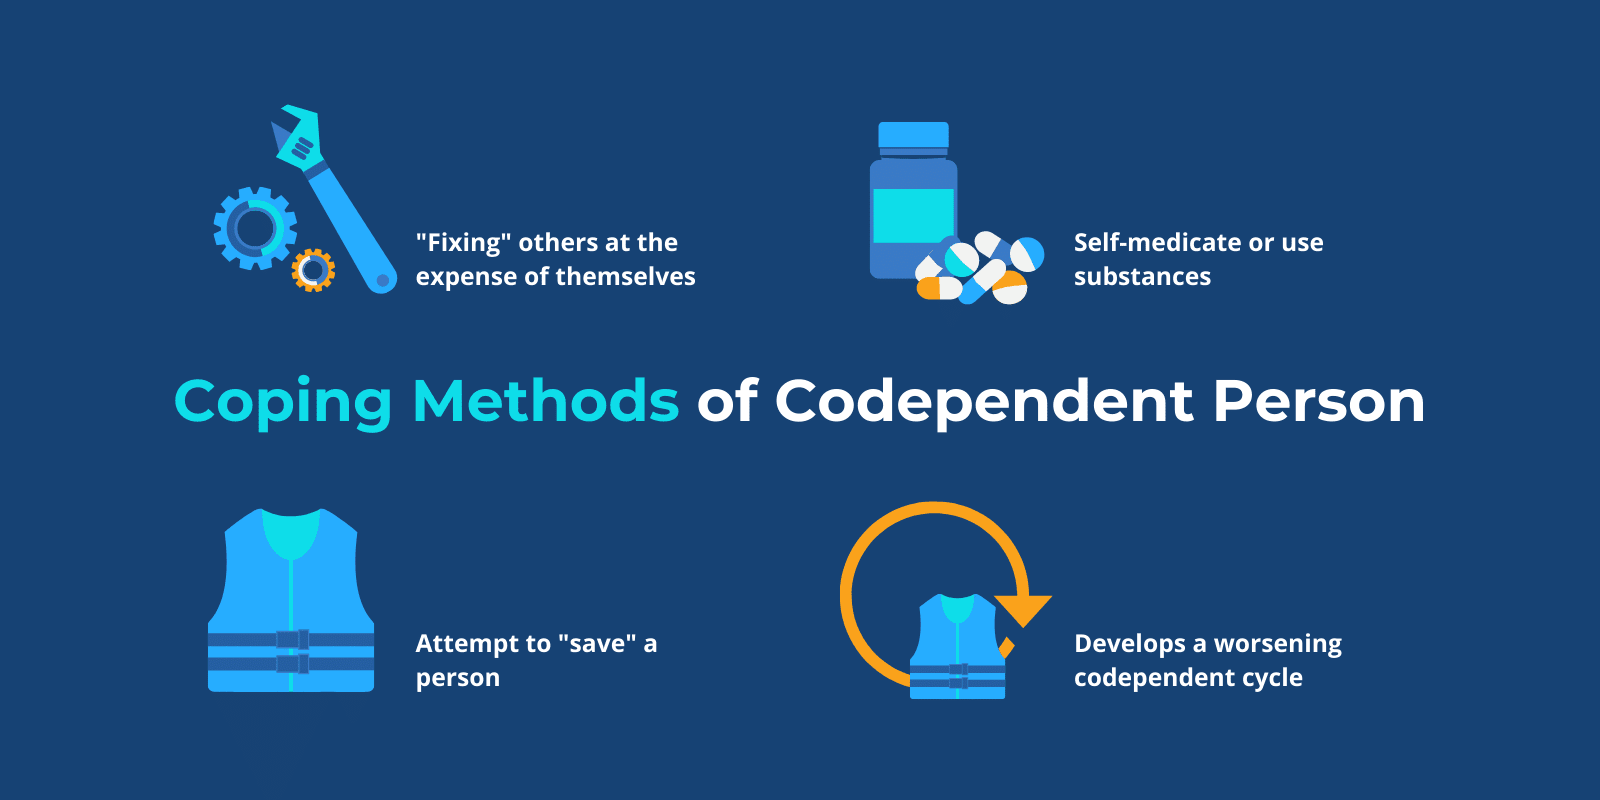 3 different coping methods of codependent person with relevant icons